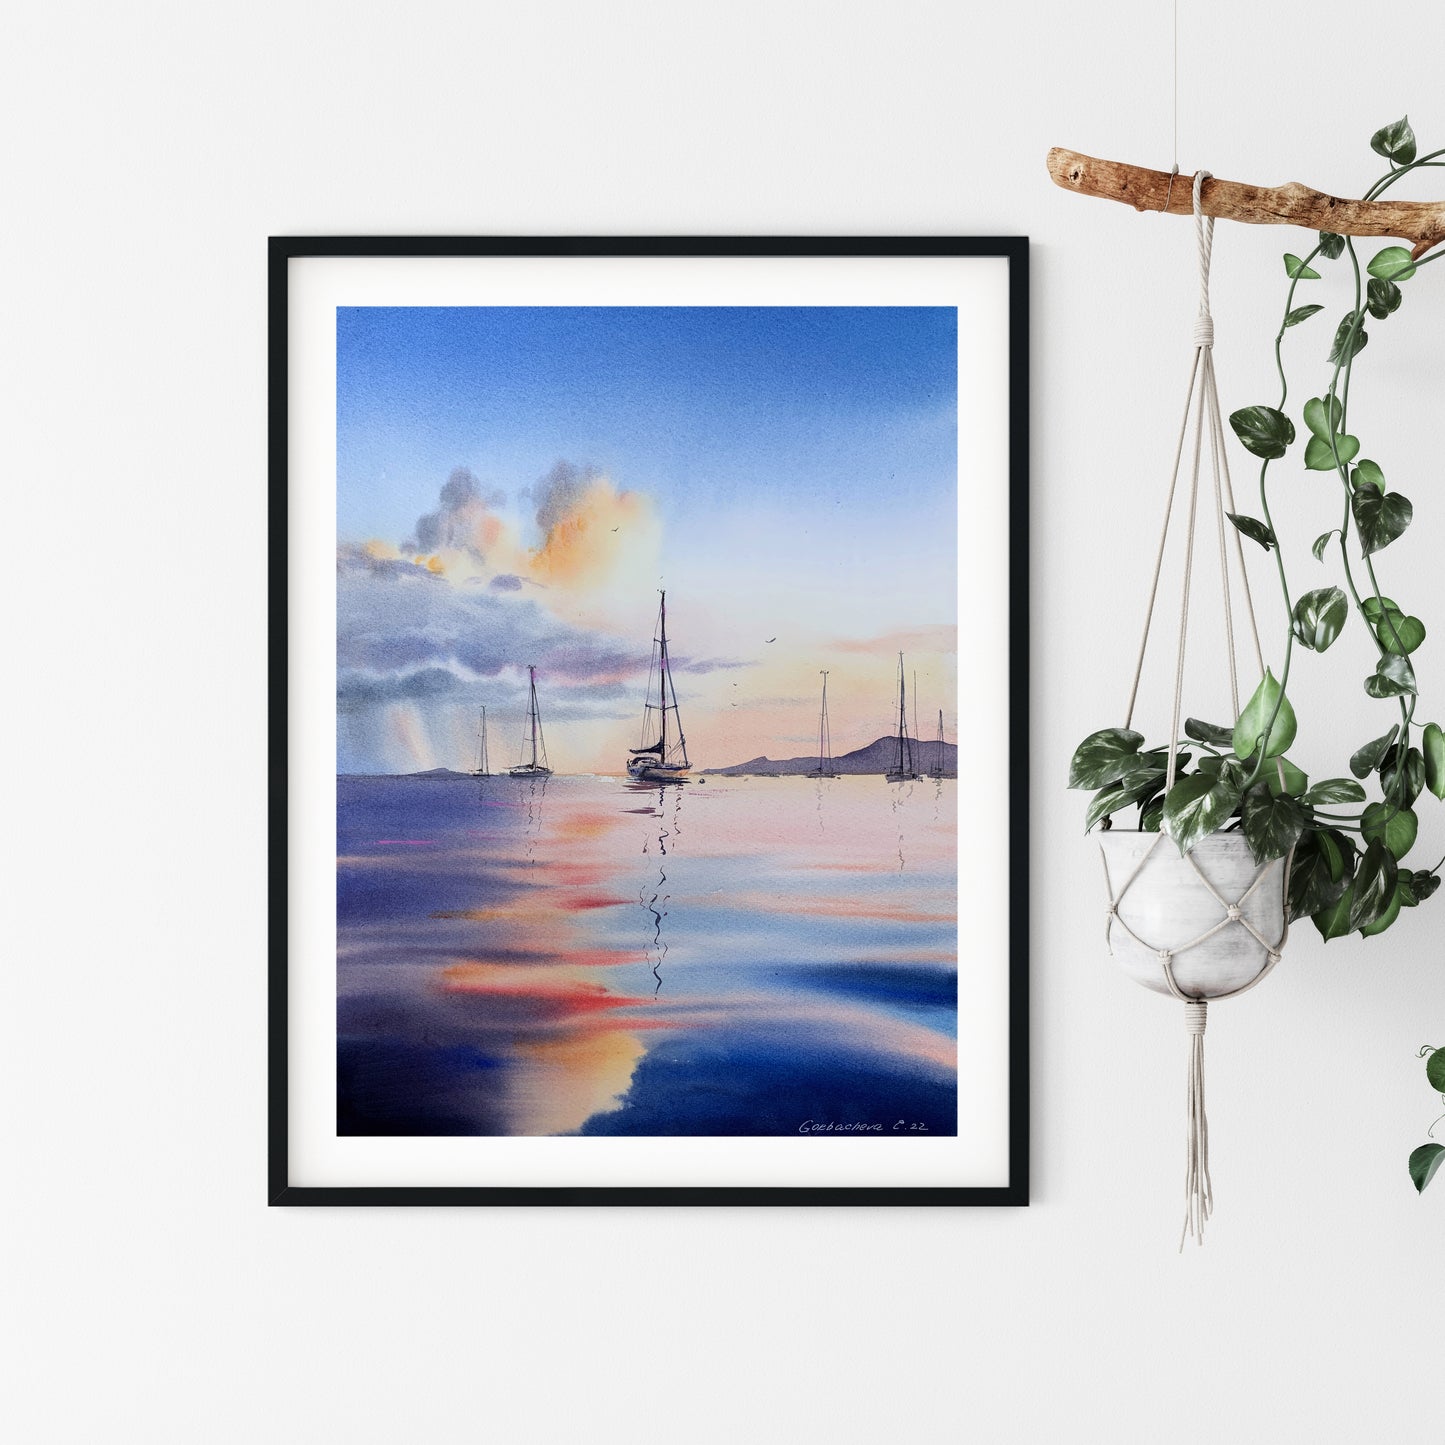 Yacht Watercolor Painting Original, Sailboat Seascape Artwork, Coastal Art, Yachting Bedroom Wall Decor, Gift For Him, Blue Pink